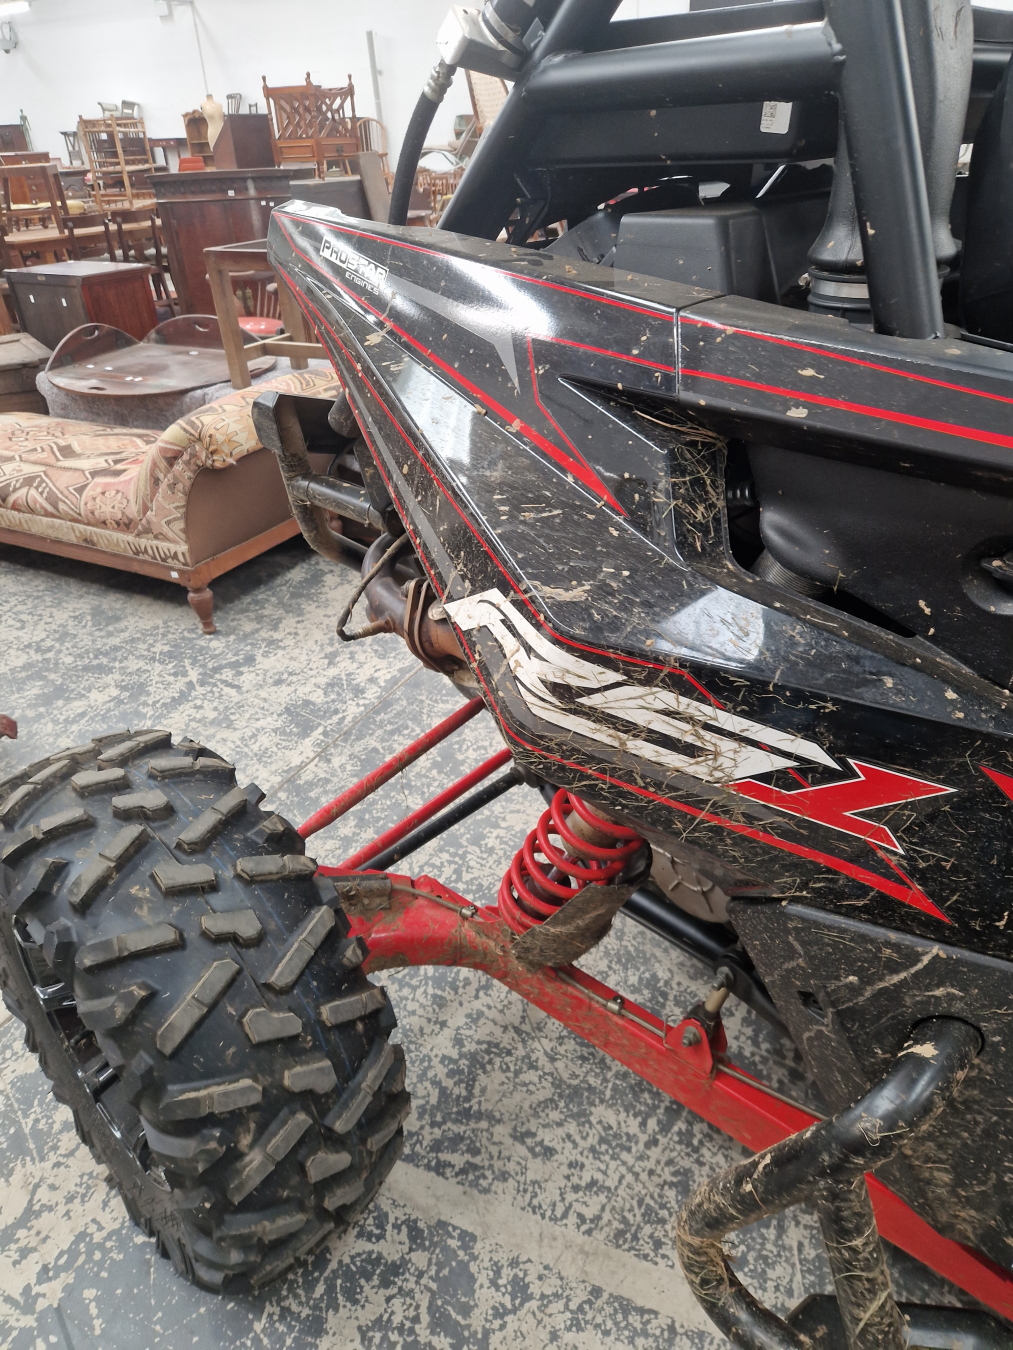 POLARIS RZR RSI 1000 ON /OFF ROAD BUGGY. 2020. FULLY ROAD LEGAL AND IN EXCELLENT CONDITION. WITH - Image 8 of 13